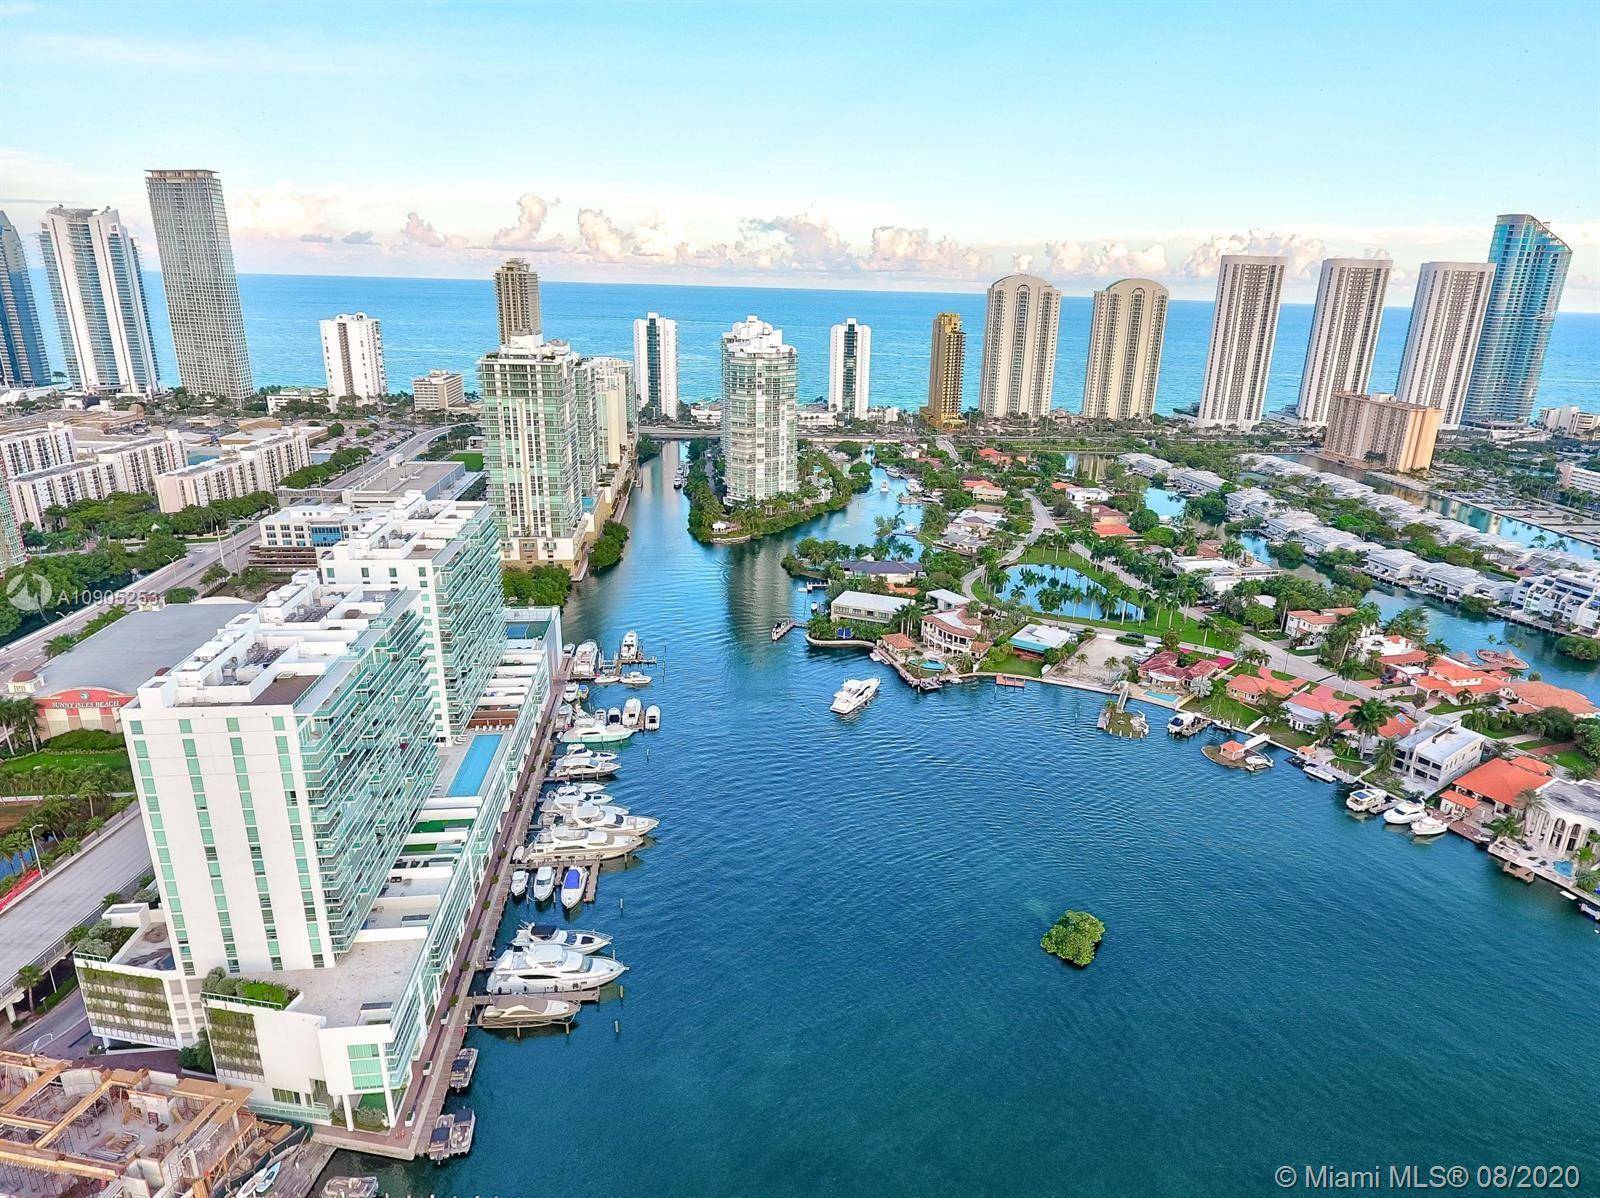 SUNNY ISLES RESTAURANT COMMERCIAL RETAIL SPACE BUSINESS OPPORTUNITY.